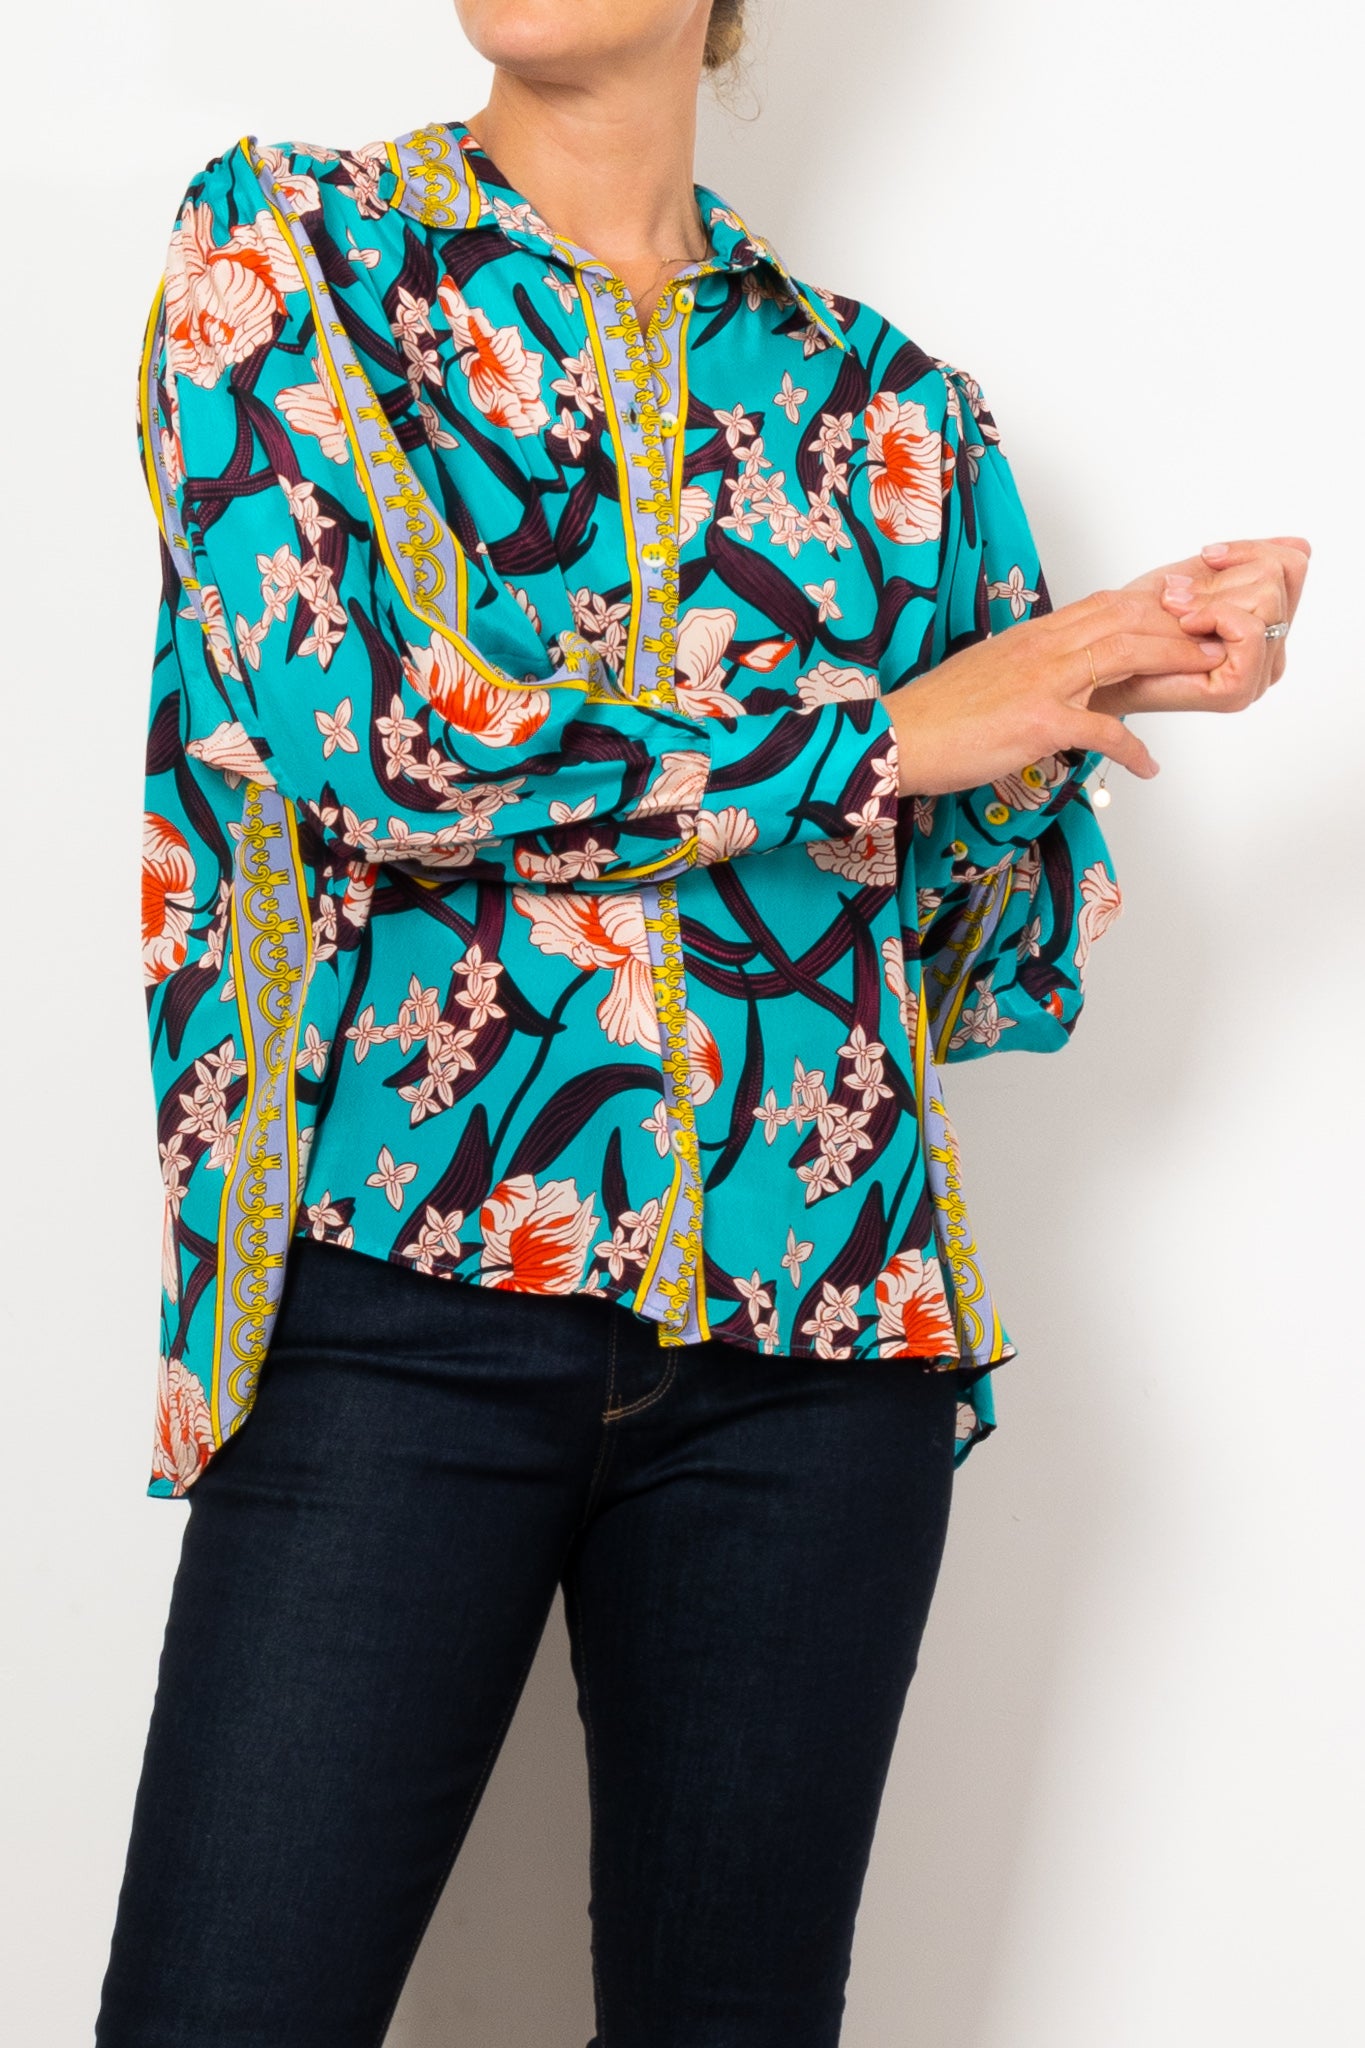 Curate by Trelise Cooper On Your Team Floral Blouse